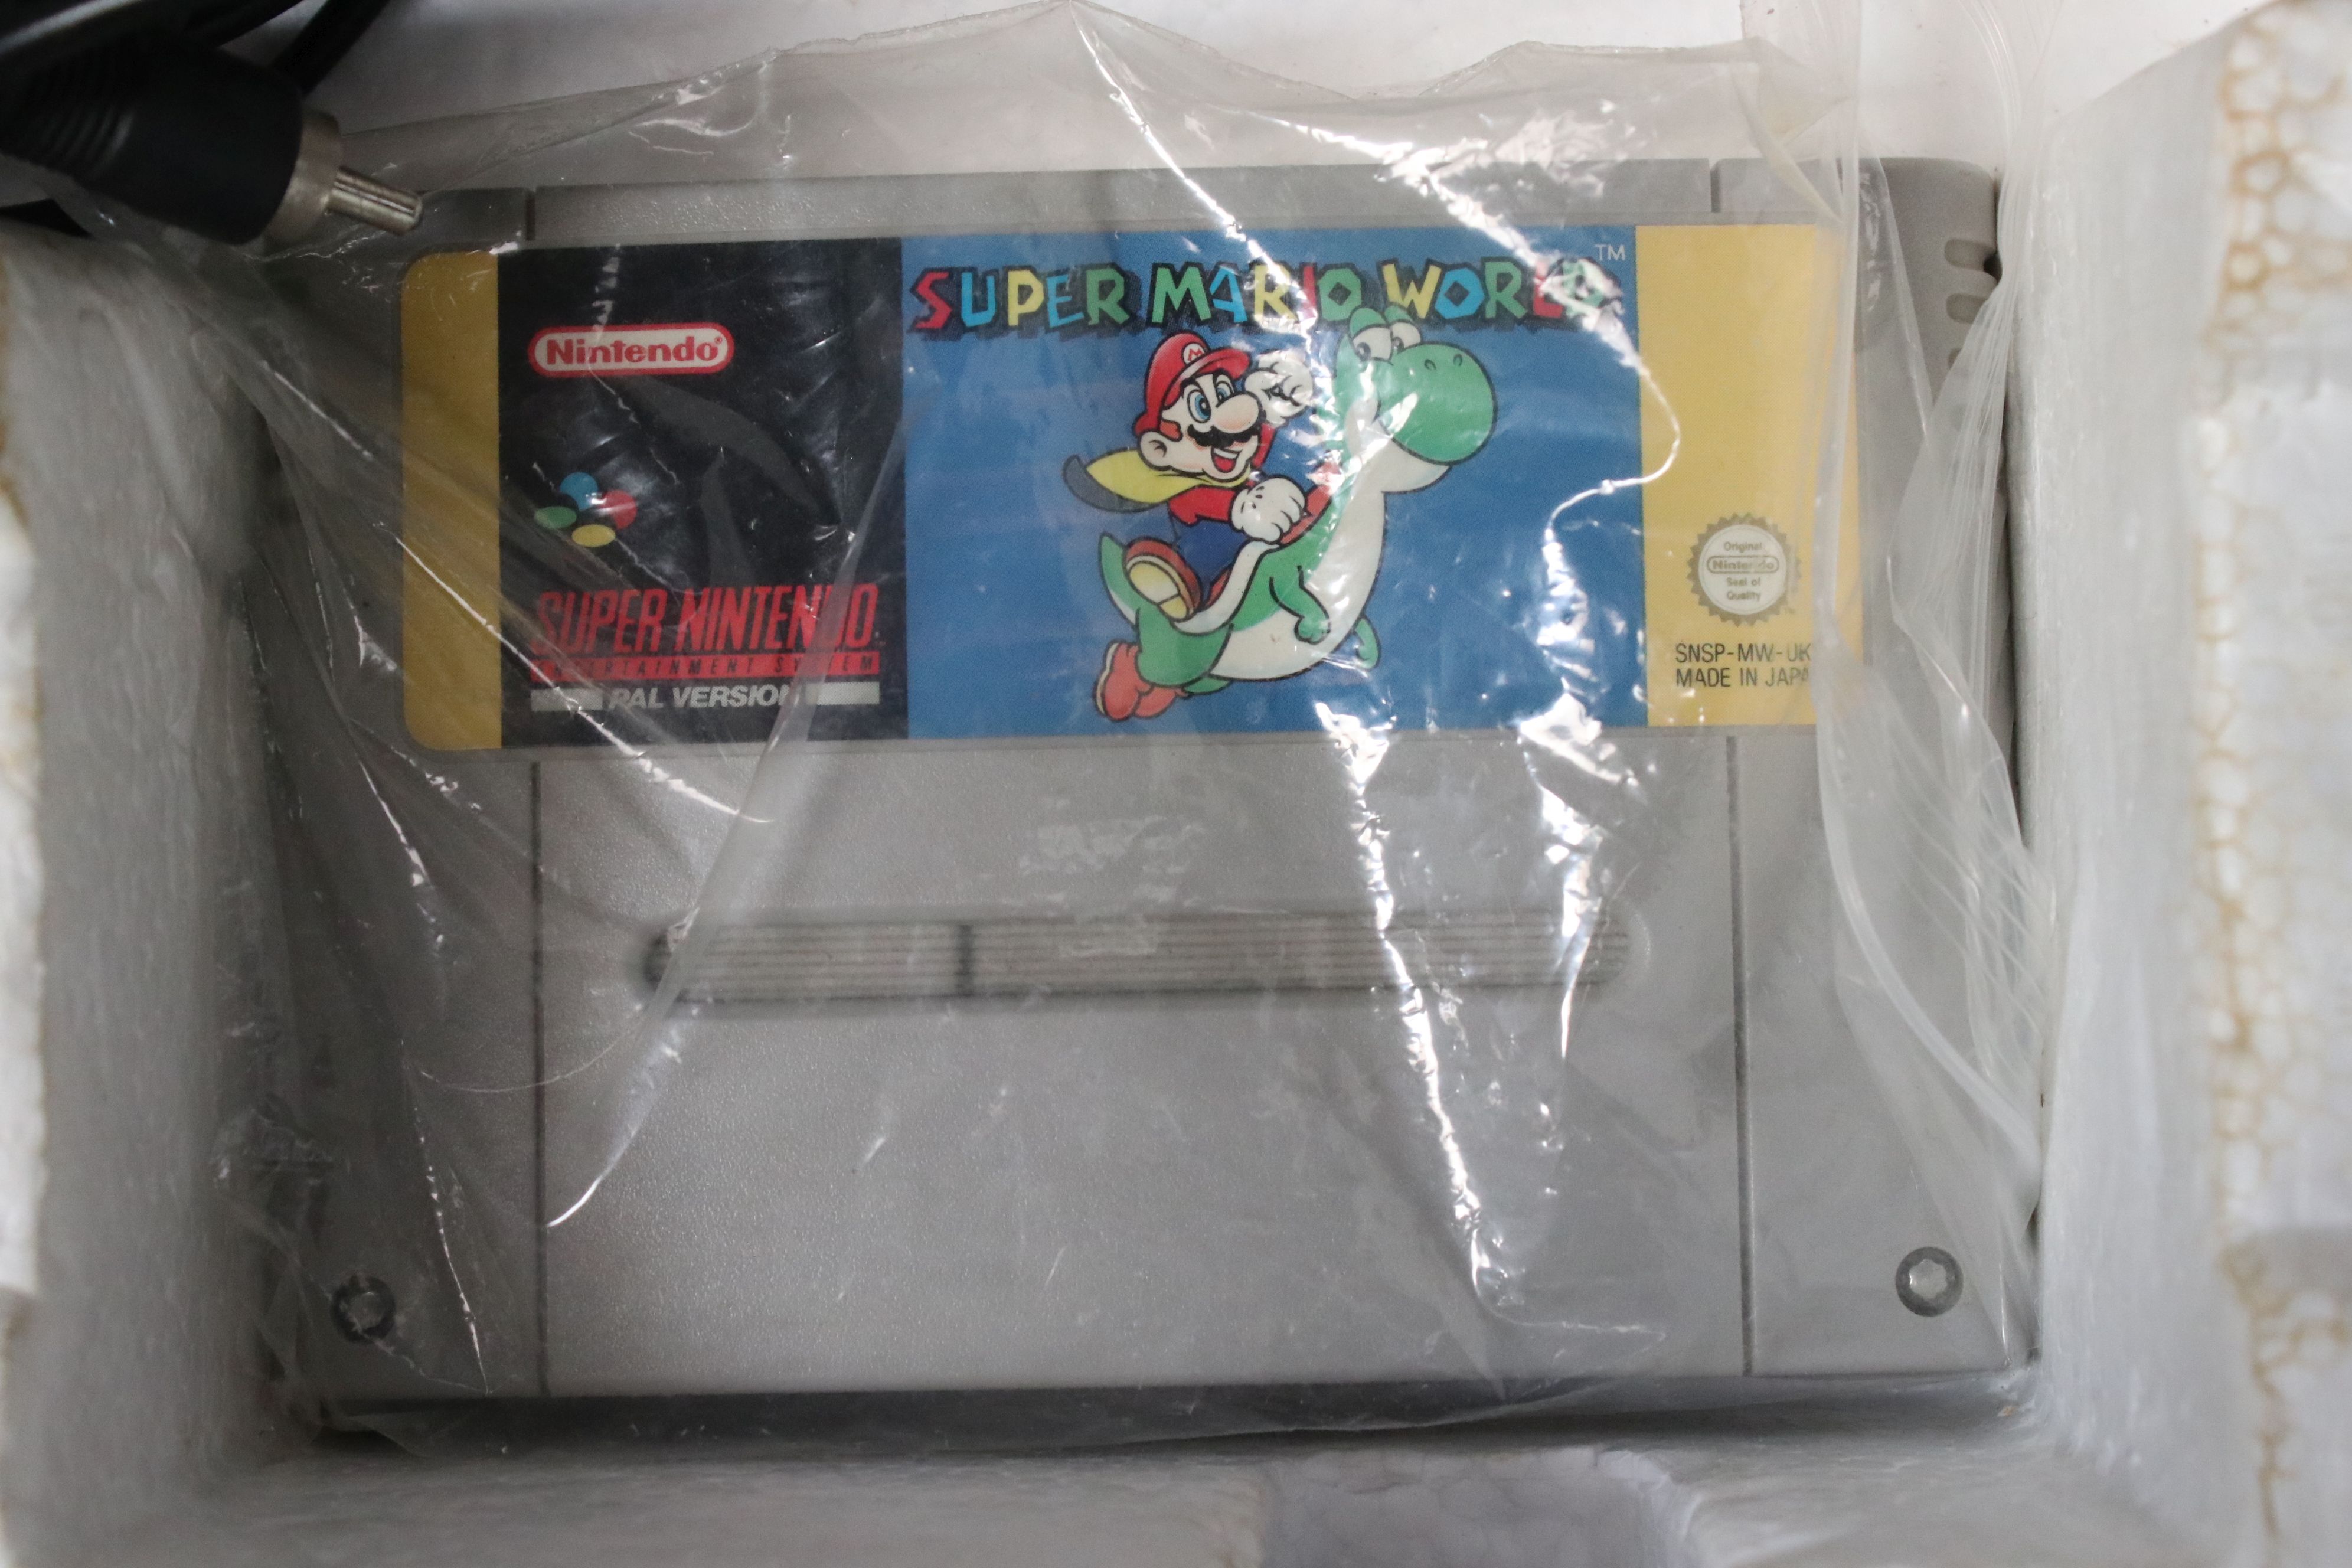 Retro Gaming - Boxed Super Nintendo SNES console with one controller and Super Mario World cartridge - Image 7 of 10